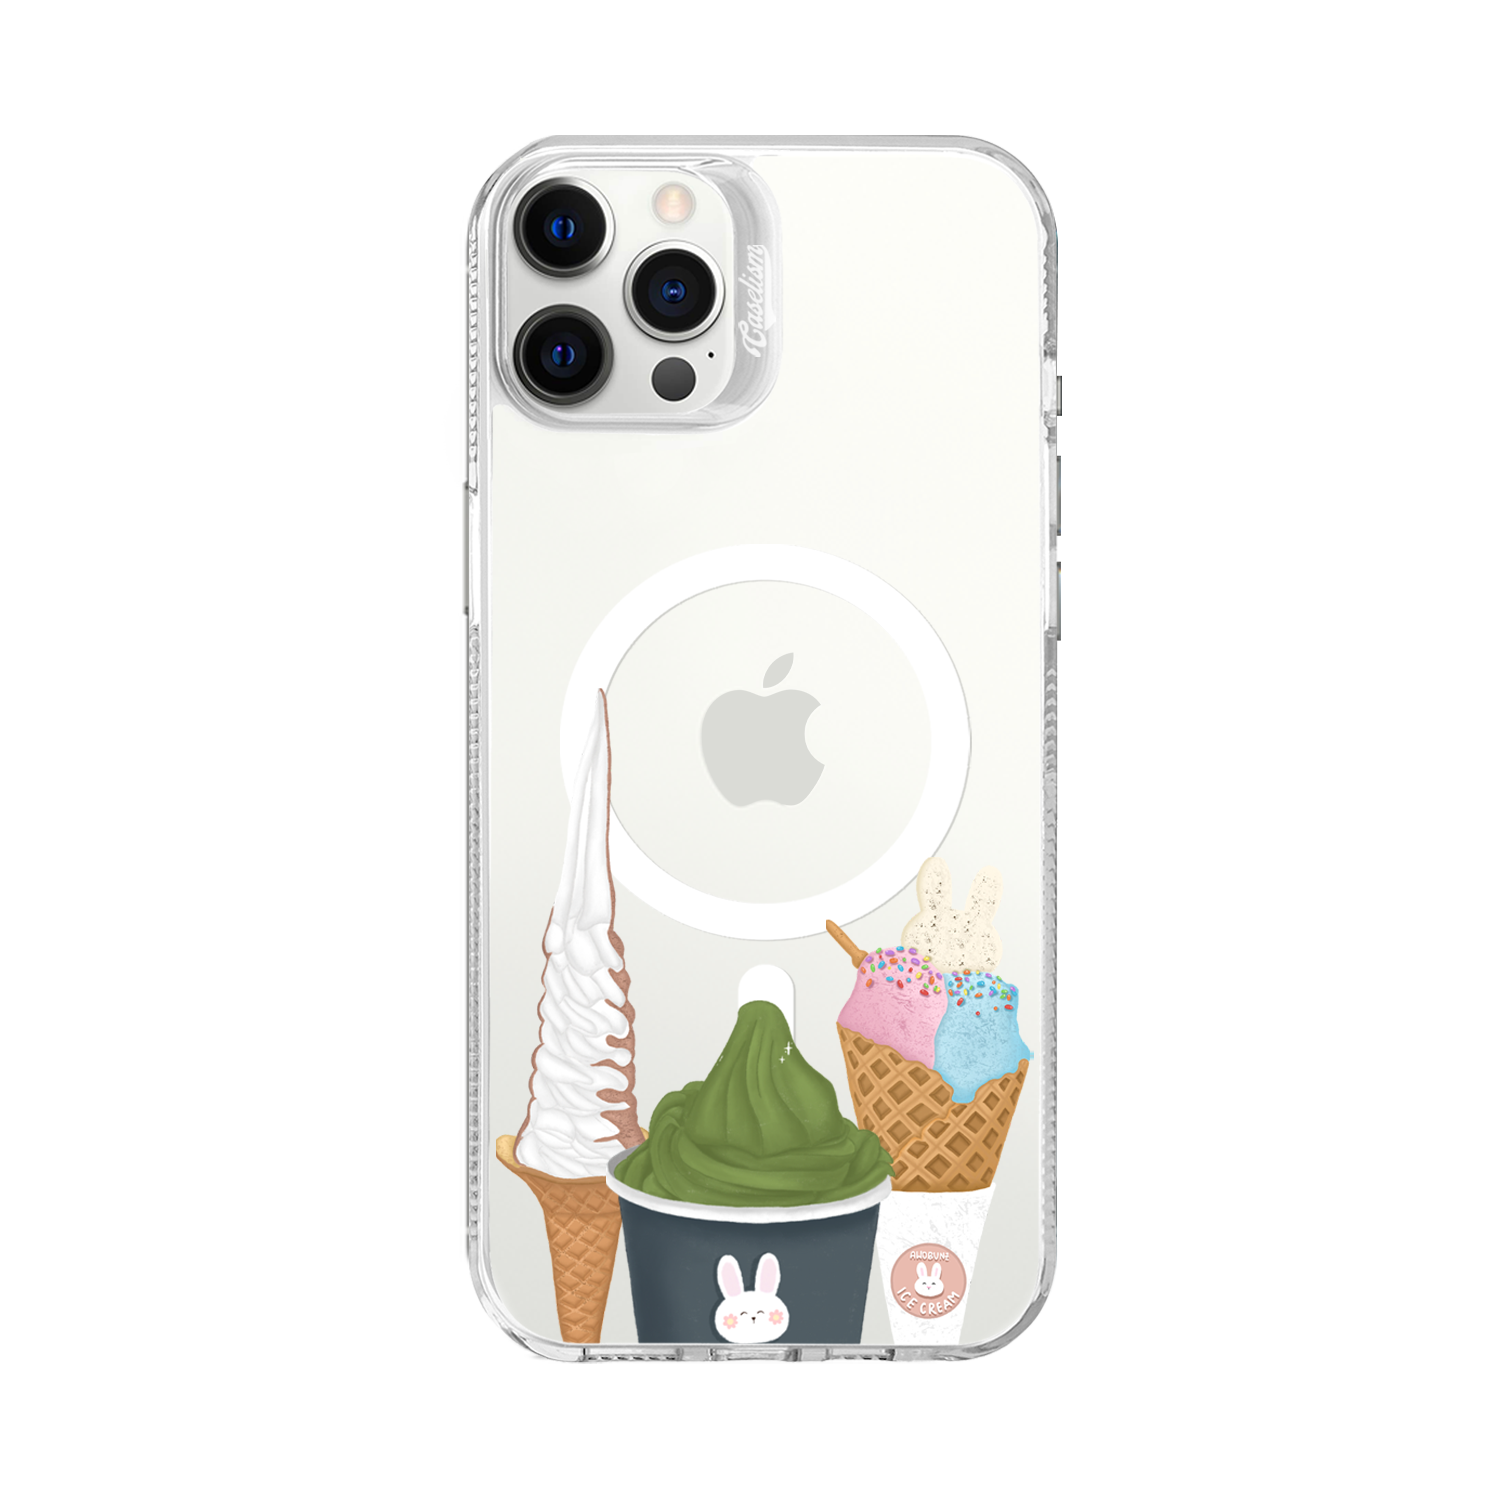 AWOB004 - ColorLite Case for iPhone